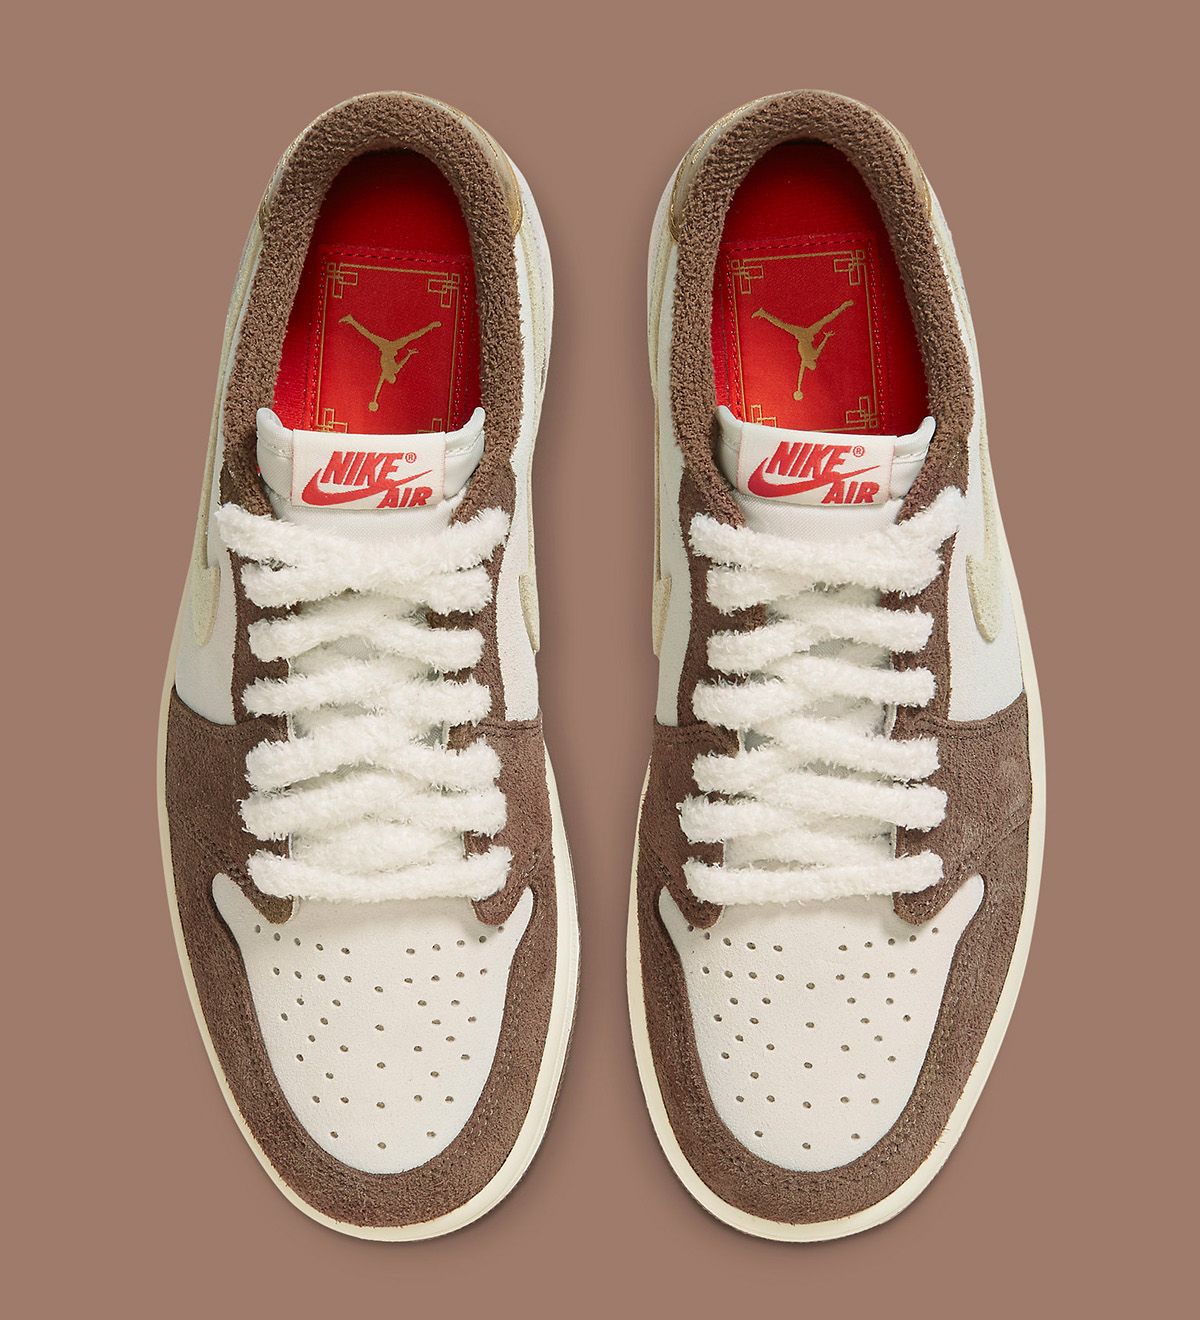 Official Images // Air Jordan 1 Low OG “Year of the Rabbit